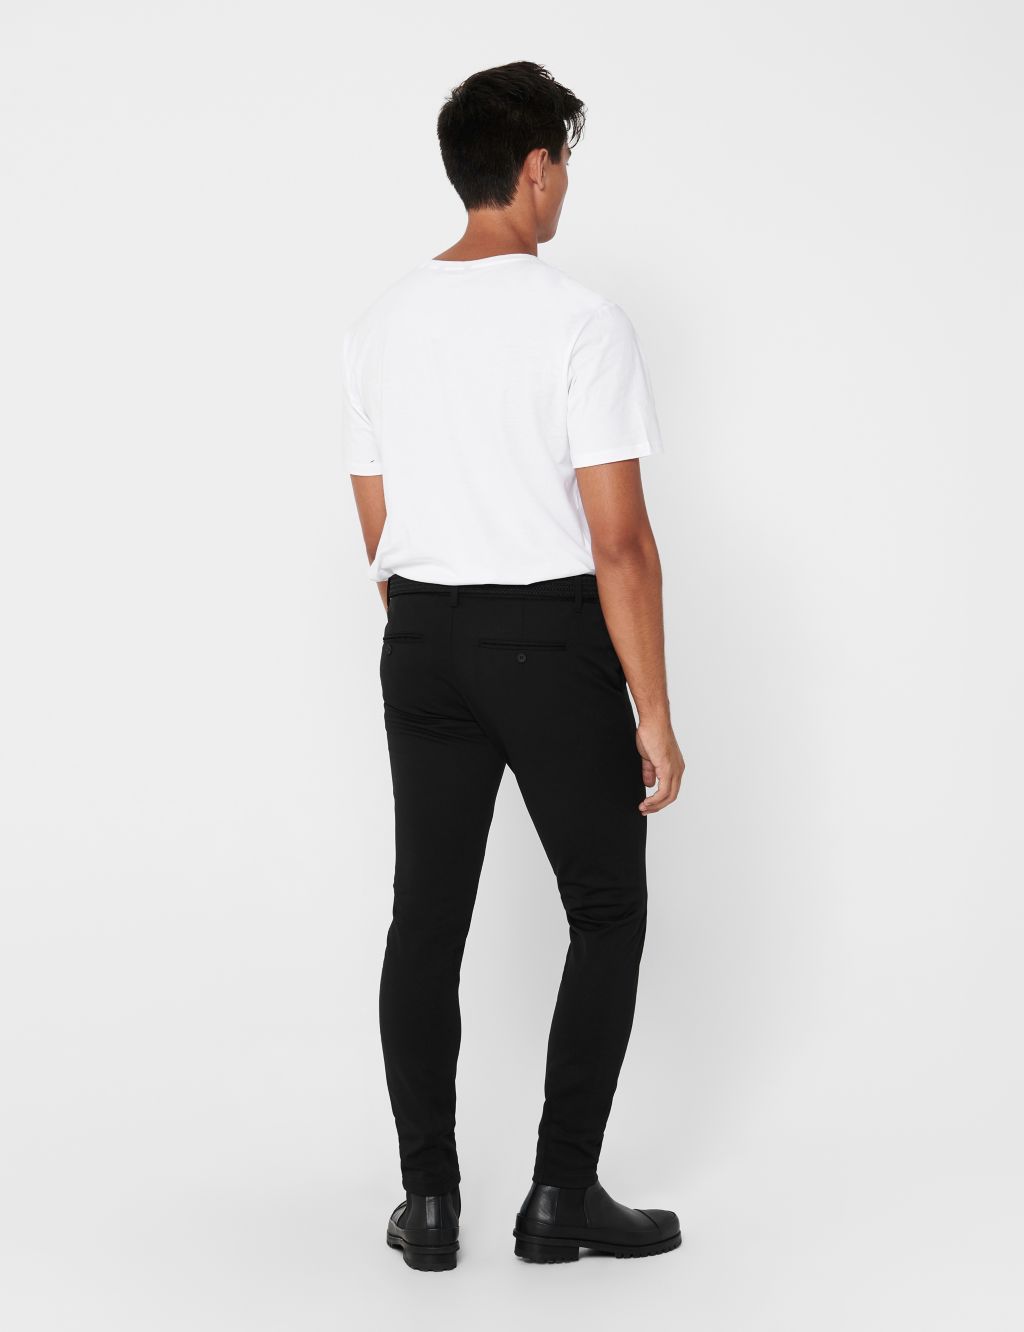 Tapered Fit Flat Front Trousers image 4